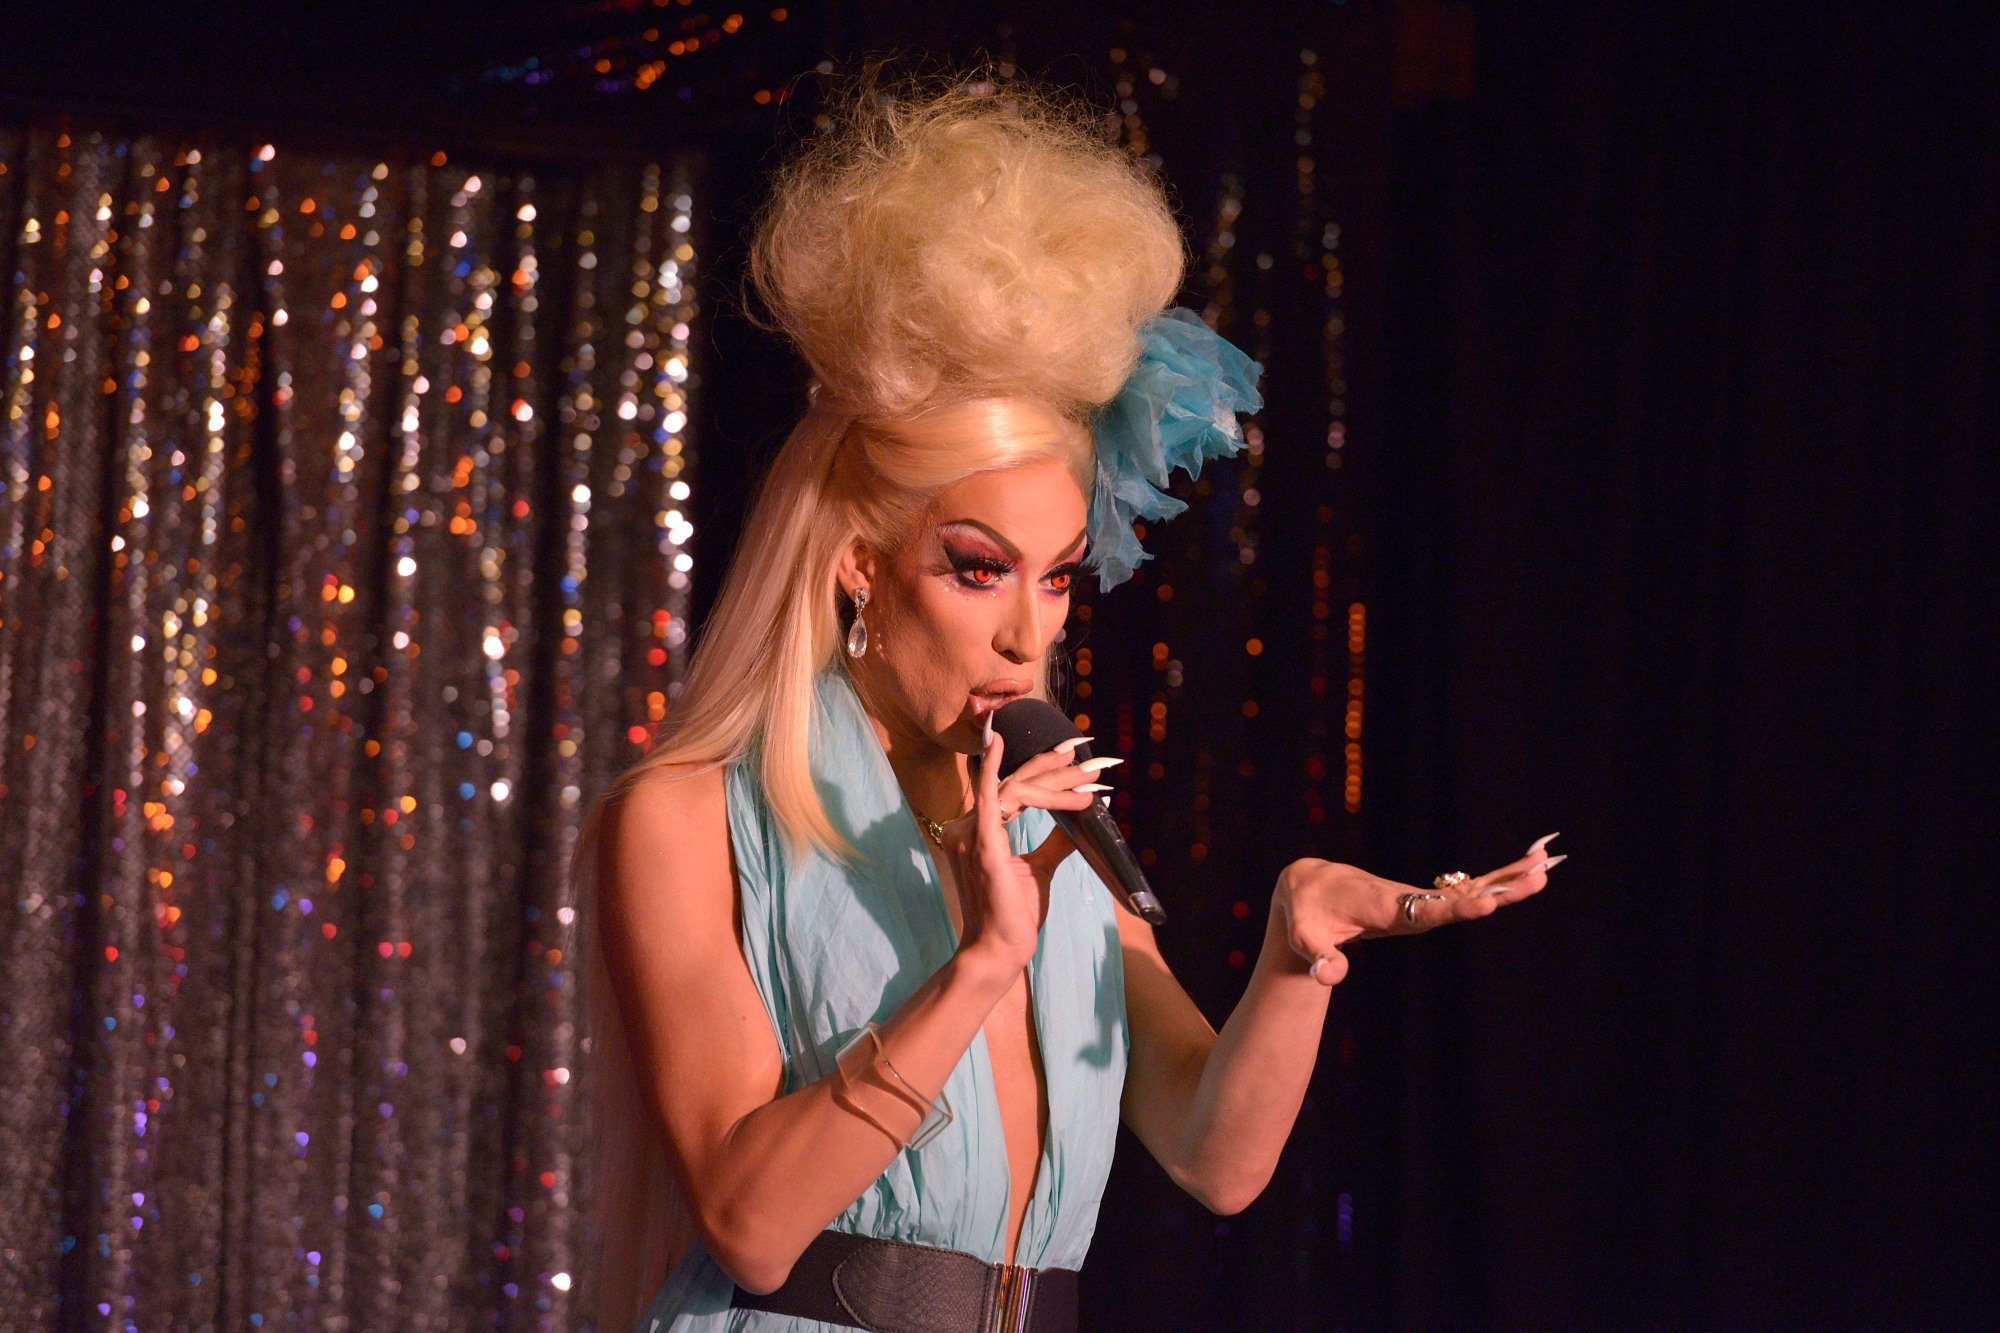 'RuPaul's Drag Race' Season 5 drag queen Alaska talking into a mic with glitter curtains in the background